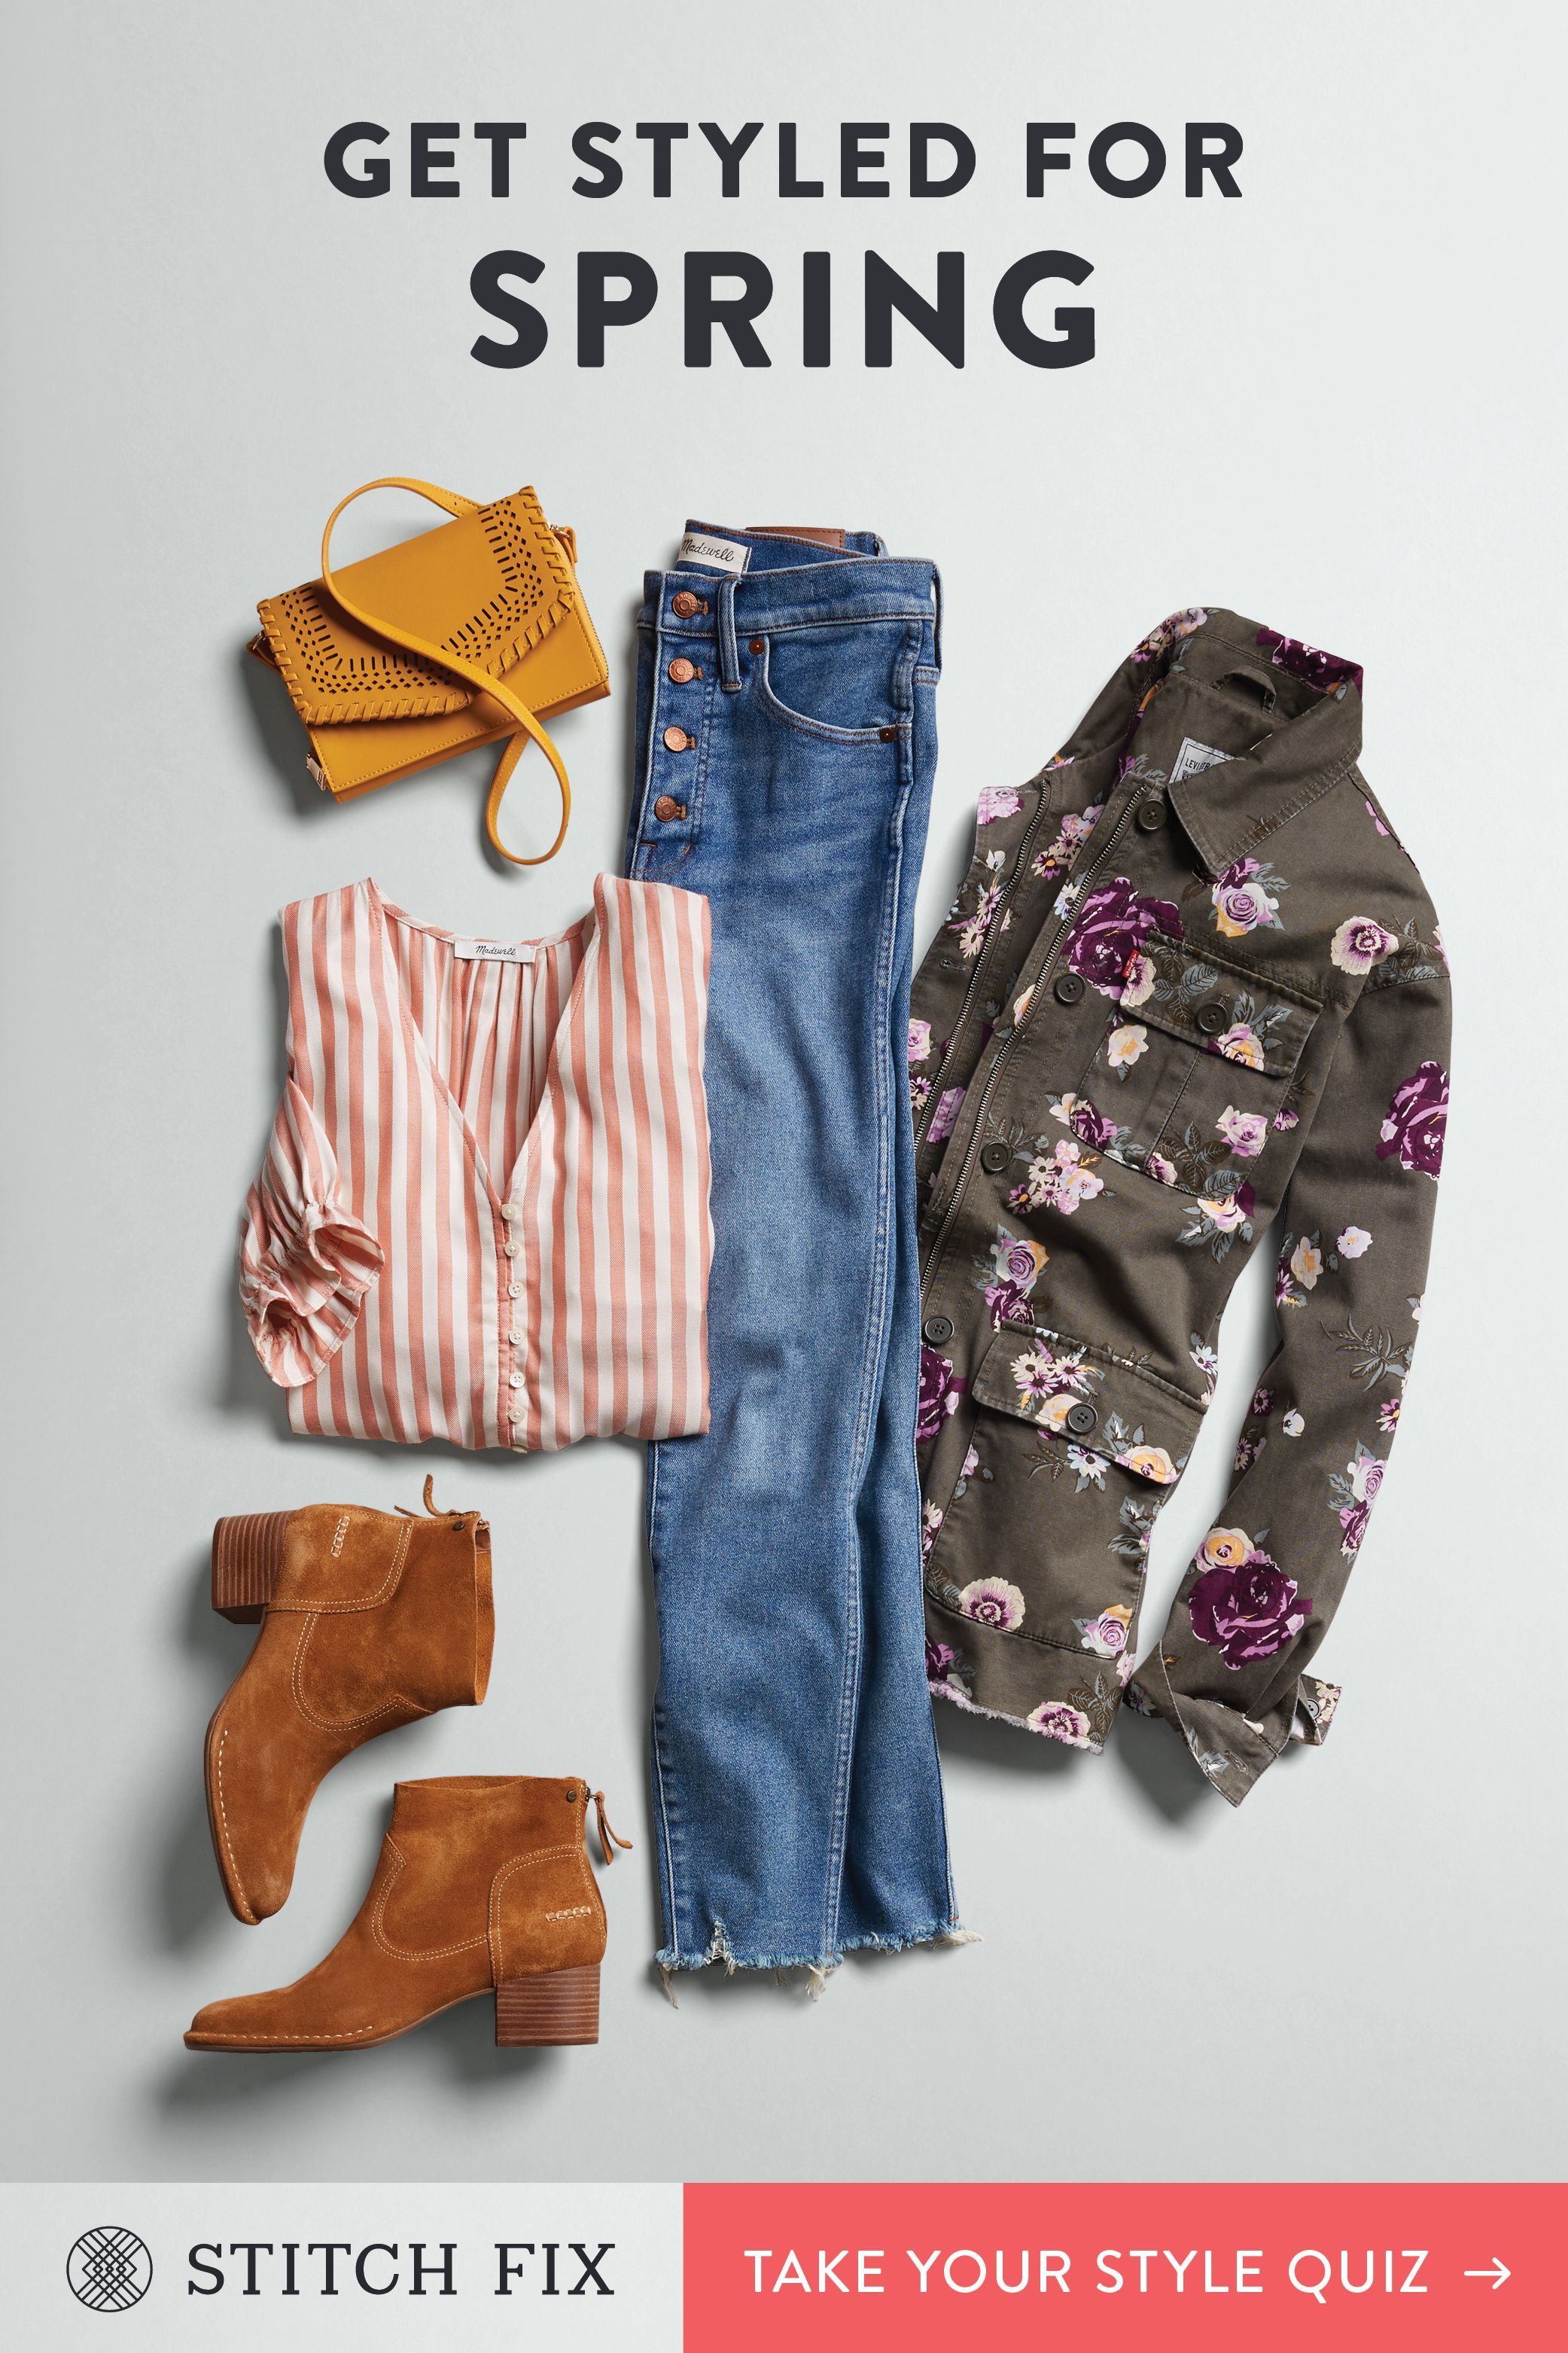 Let a Stitch Fix Personal Stylist hand-select and deliver clothes that match your taste, size & price preferences. Try pieces on at home and keep what works. Shipping, returns & exchanges are always free. Plus, there’s no subscription required. Sign up now and make this your most stylish season yet. -   21 DIY Clothes Man wardrobes
 ideas